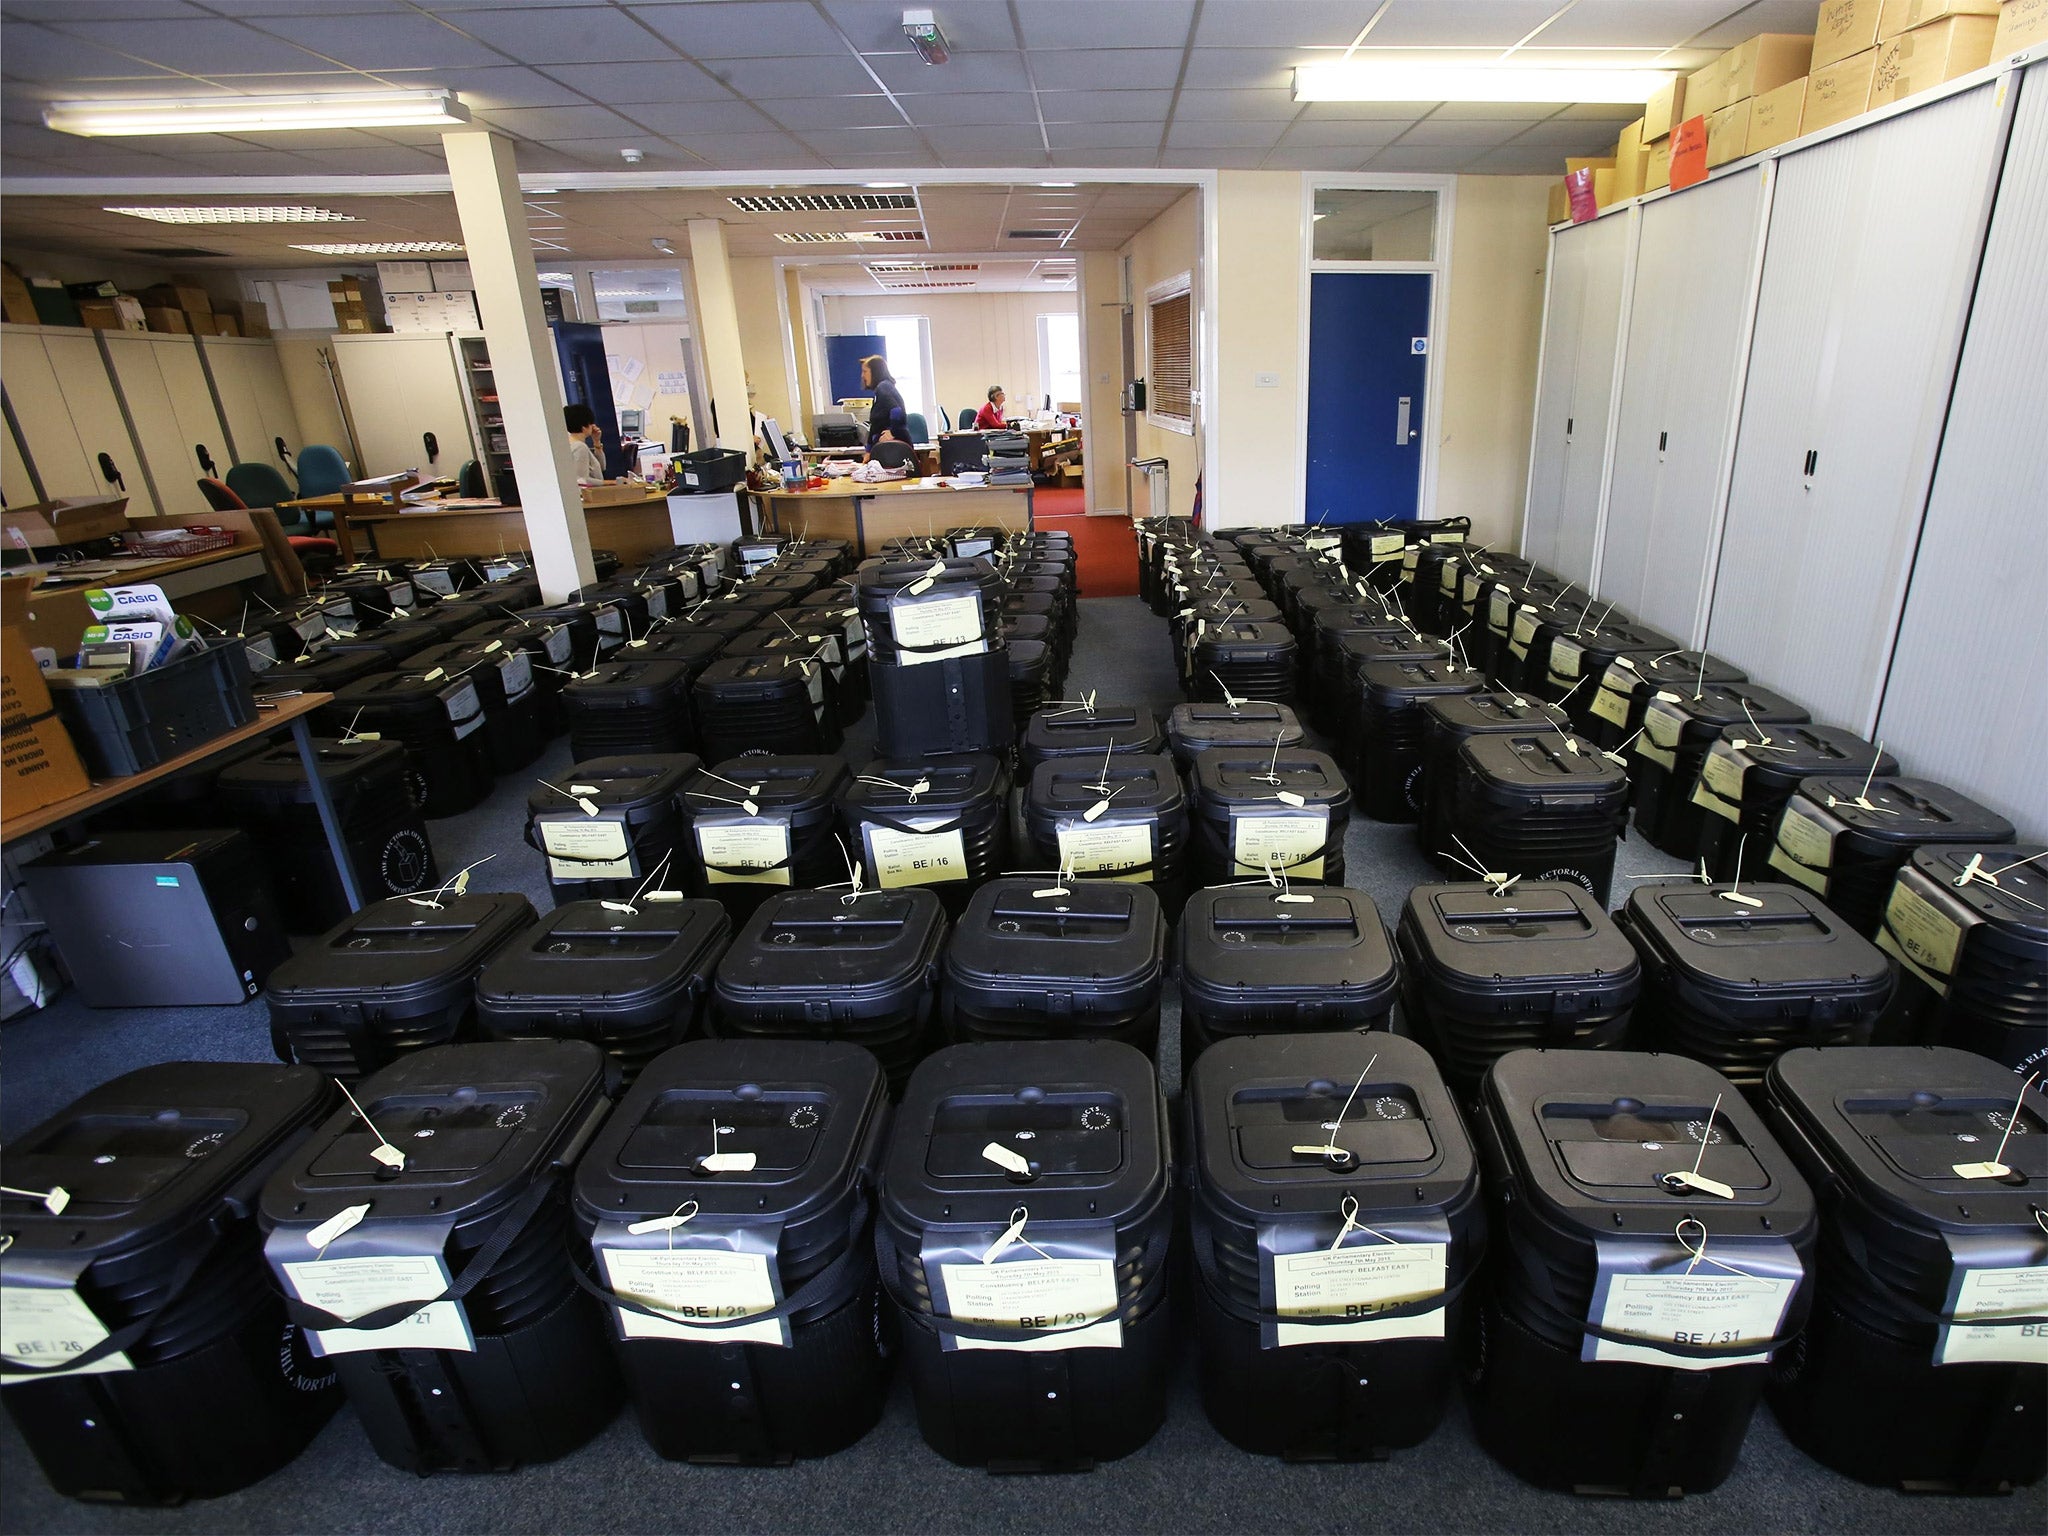 Ballot boxes ready for delivery to polling stations